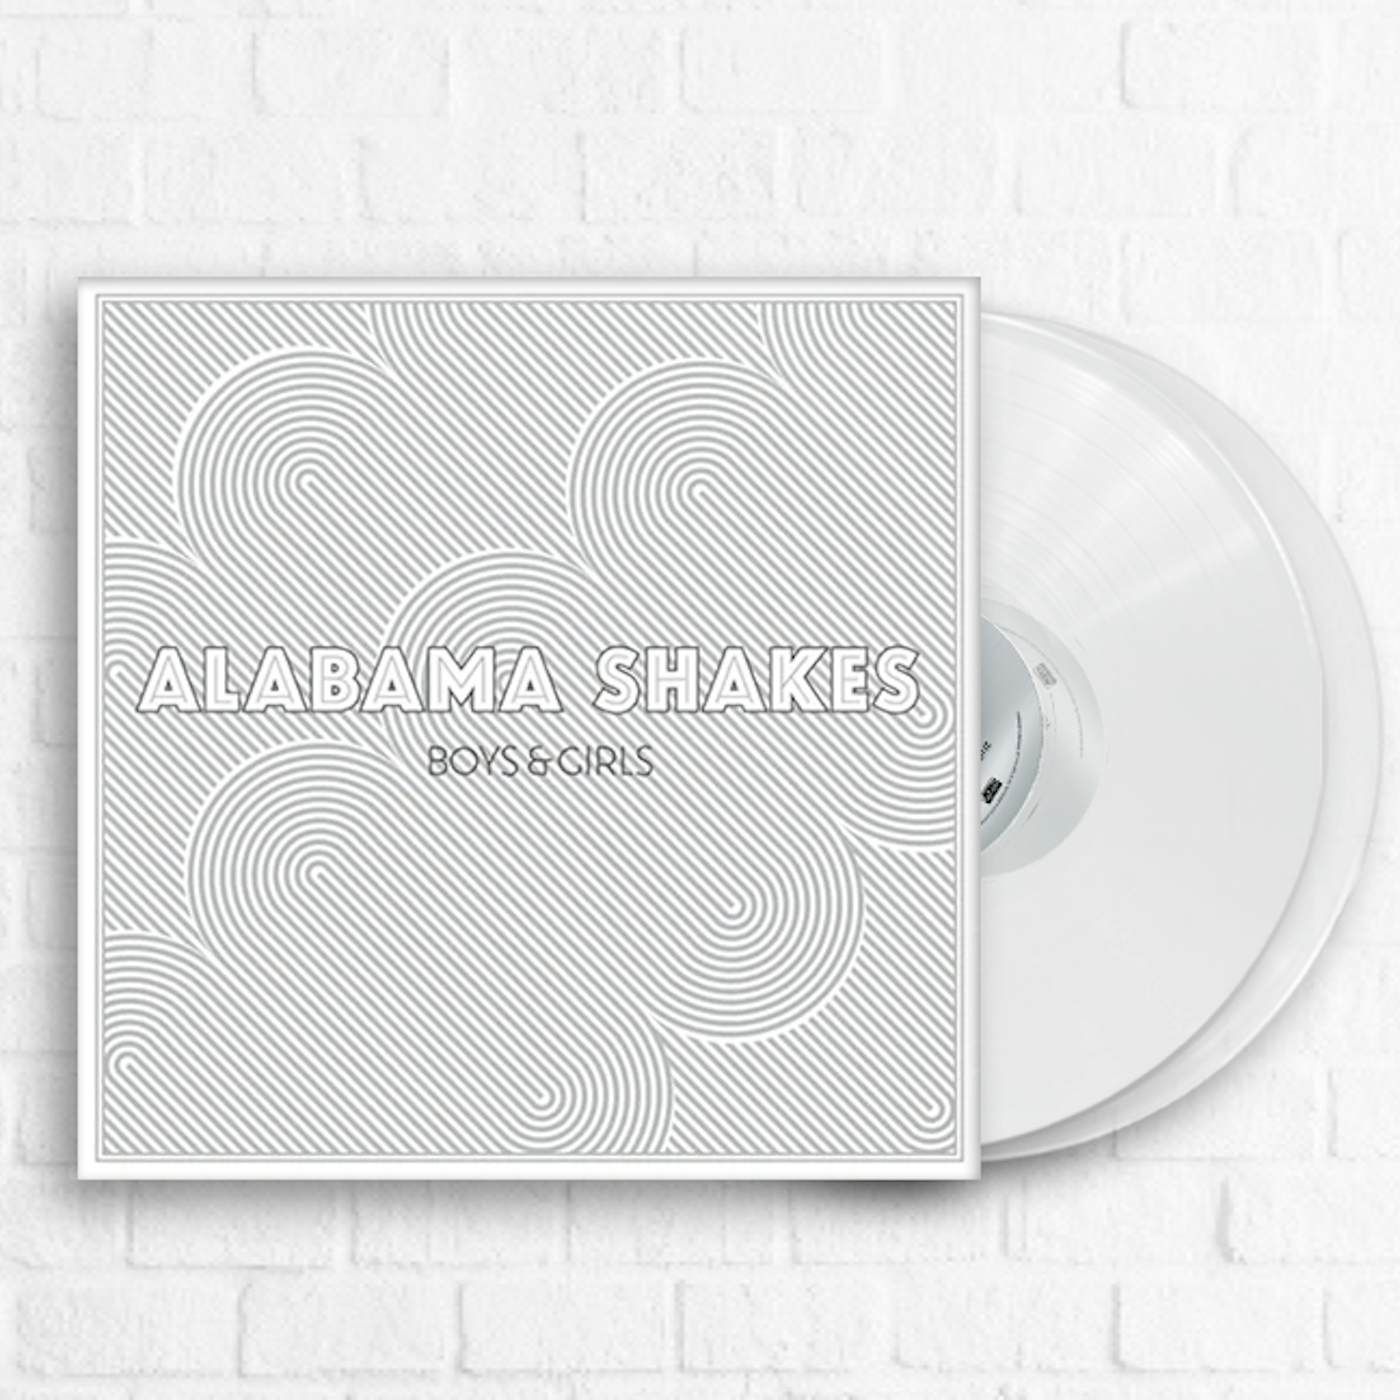 Alabama Shakes Boys & Girls 10 Year Deluxe Edition [2xLP] [Limited Cloudy Clear]